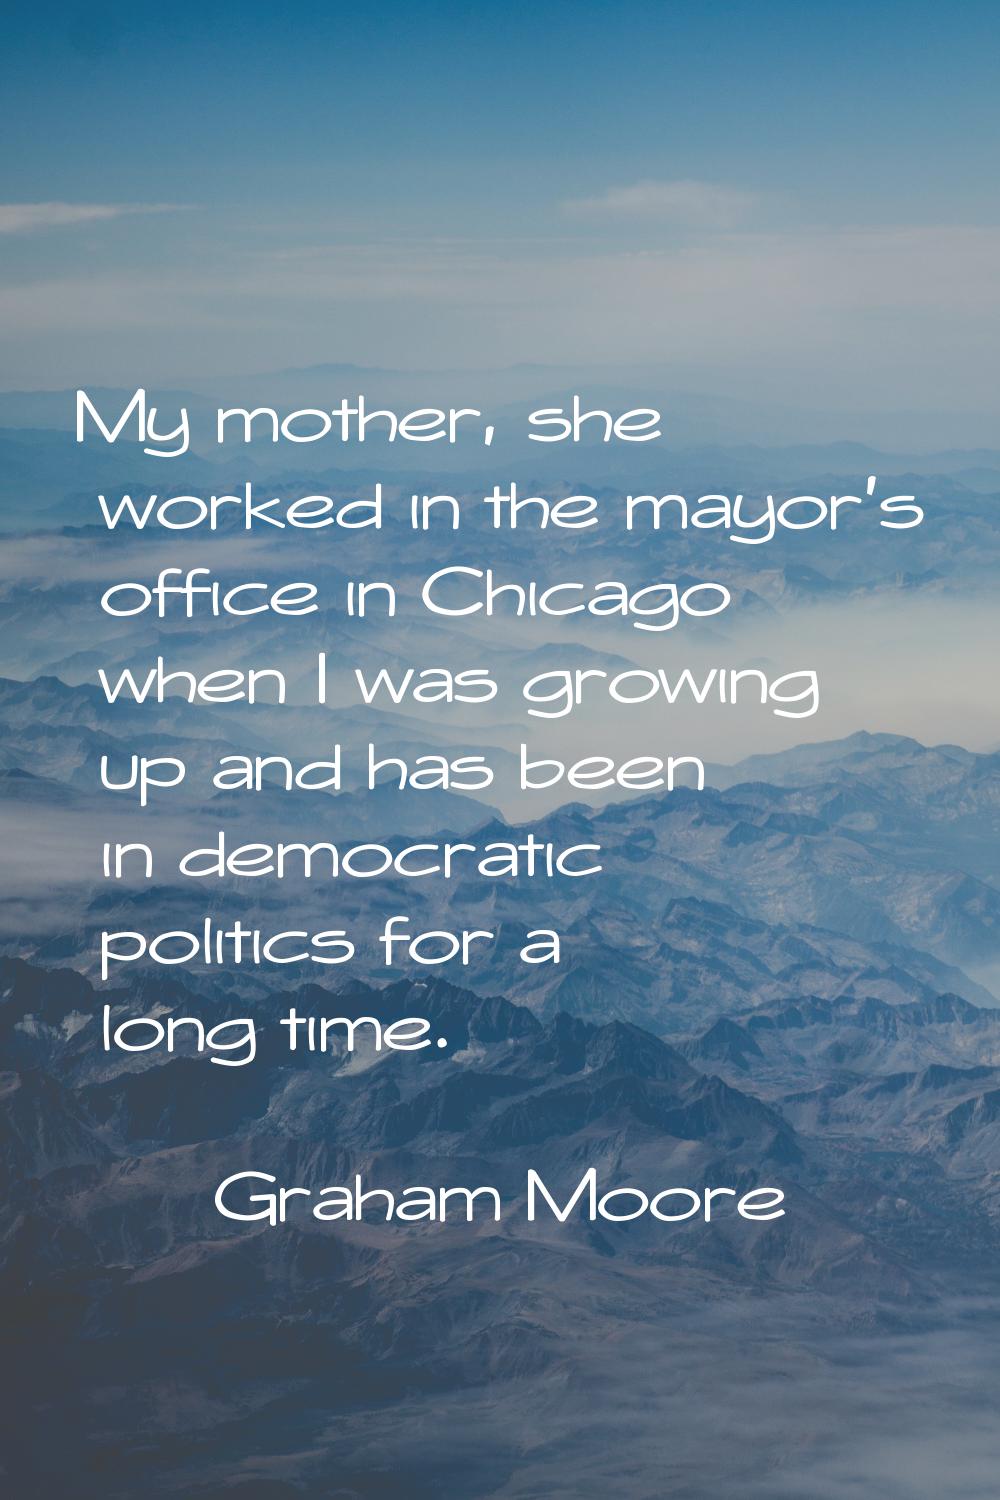 My mother, she worked in the mayor's office in Chicago when I was growing up and has been in democr